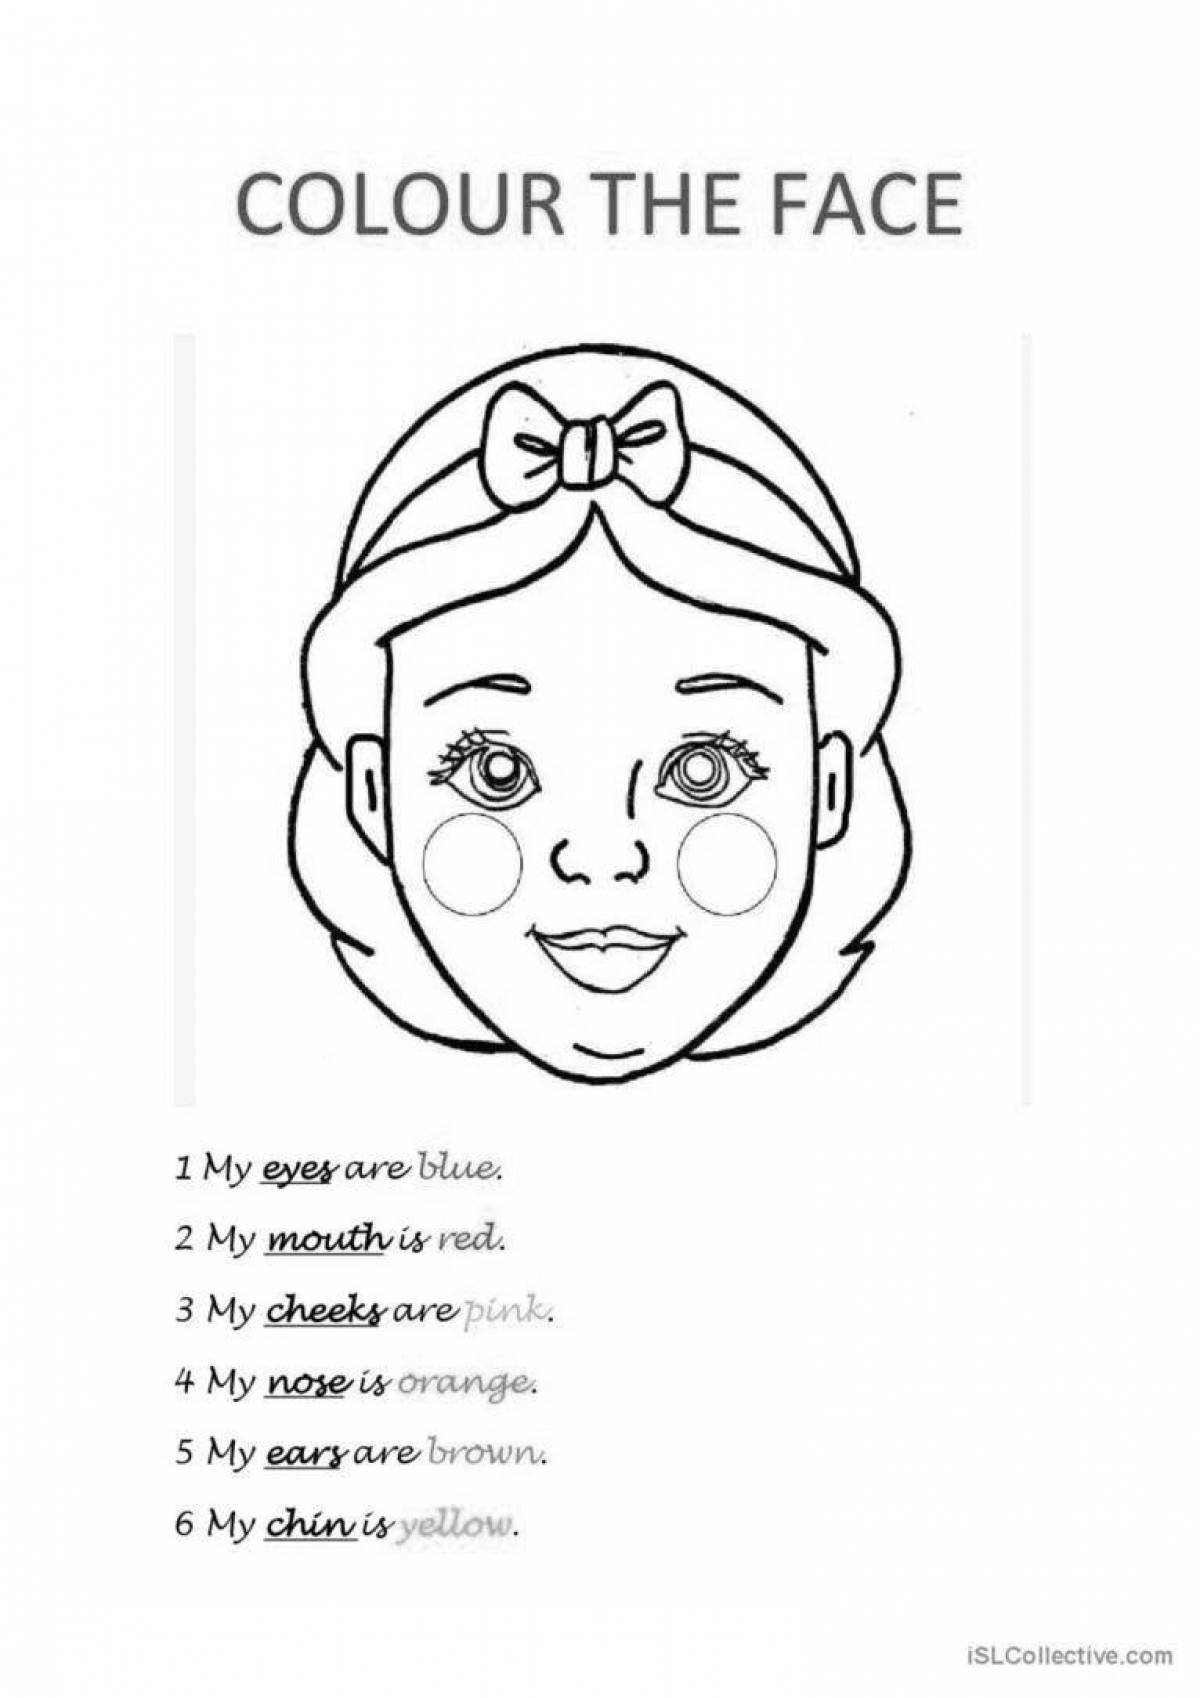 Fun parts of a face coloring page for kids